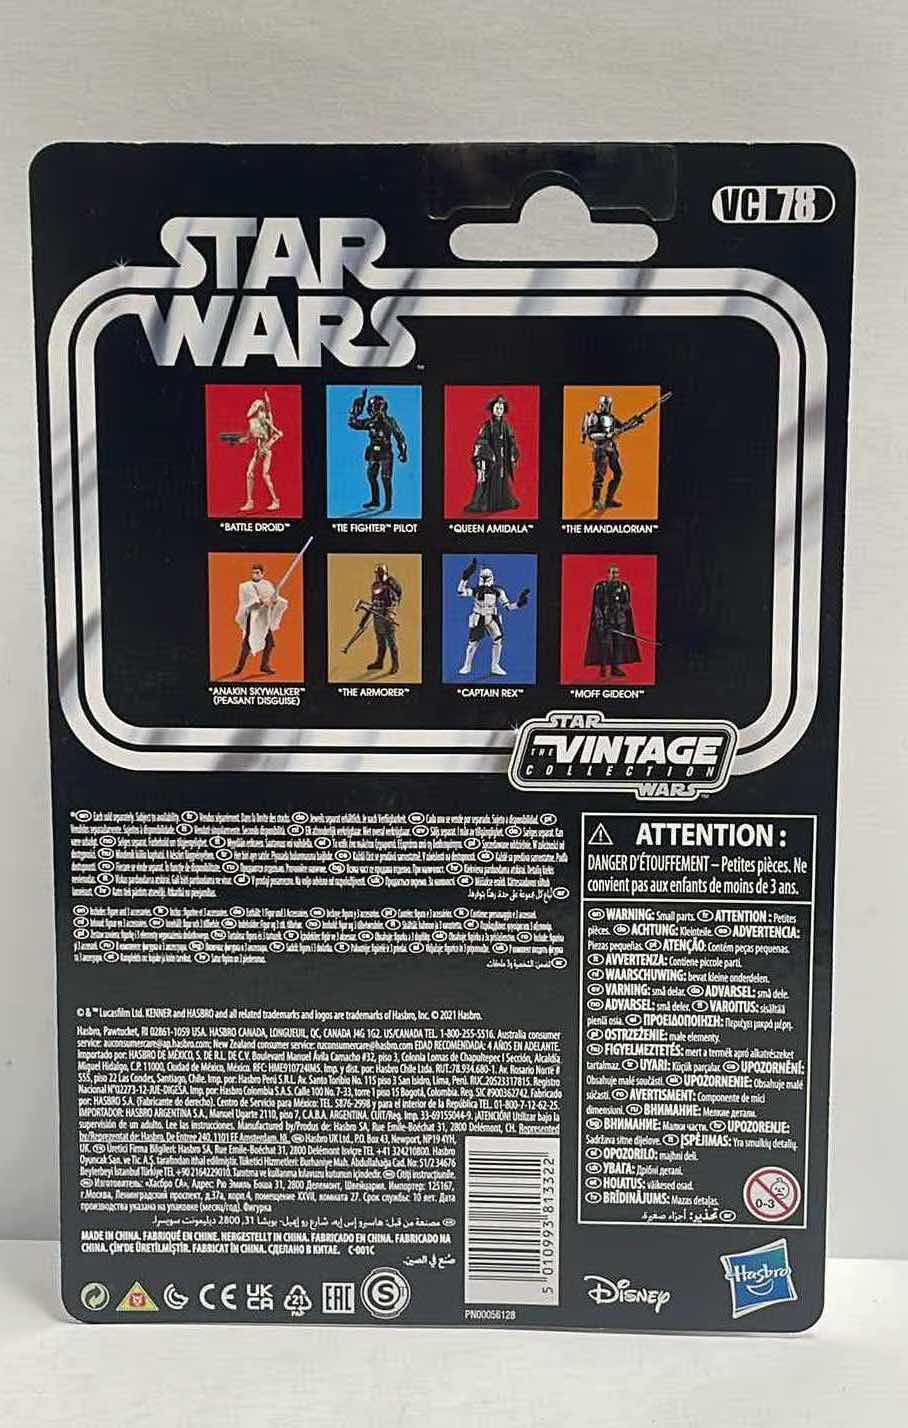 Photo 2 of NIB STAR WARS THE VINTAGE COLLECTION  “ BATTLE DROID”
RETAIL PRICE $30.00